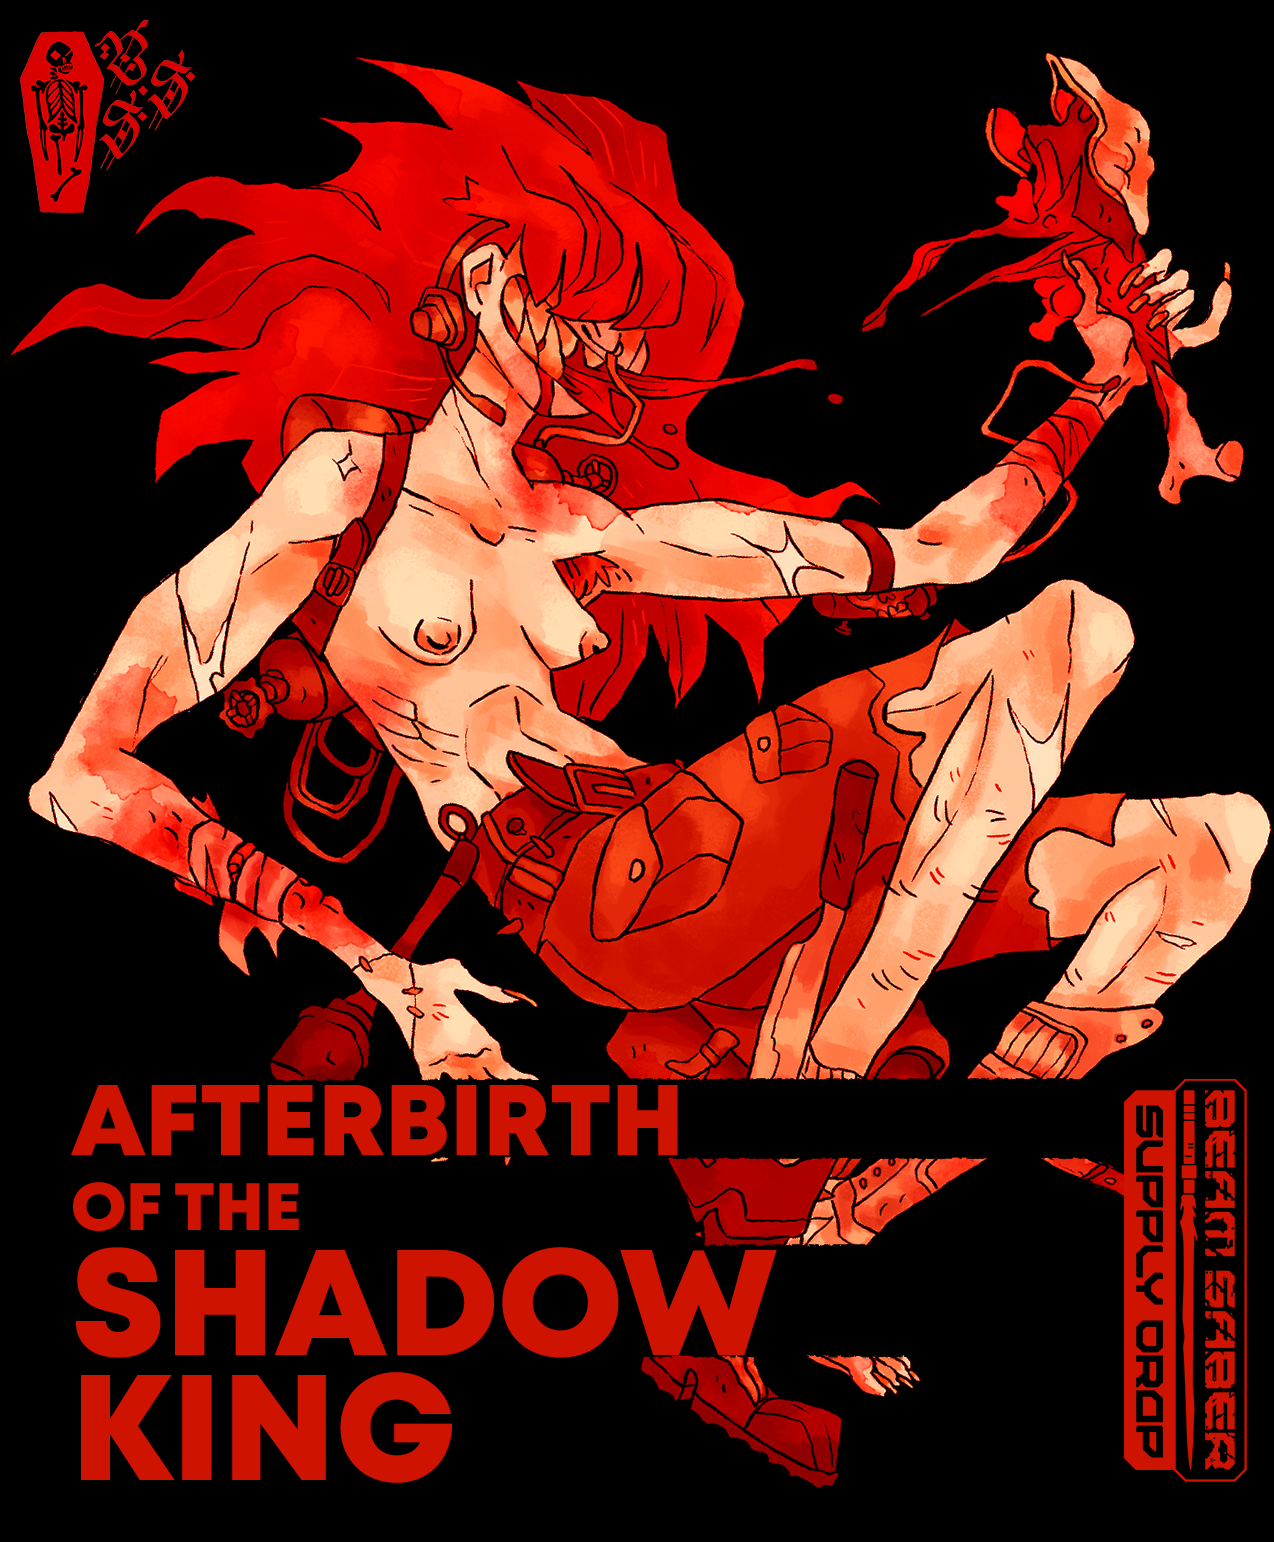 Afterbirth of the Shadow King